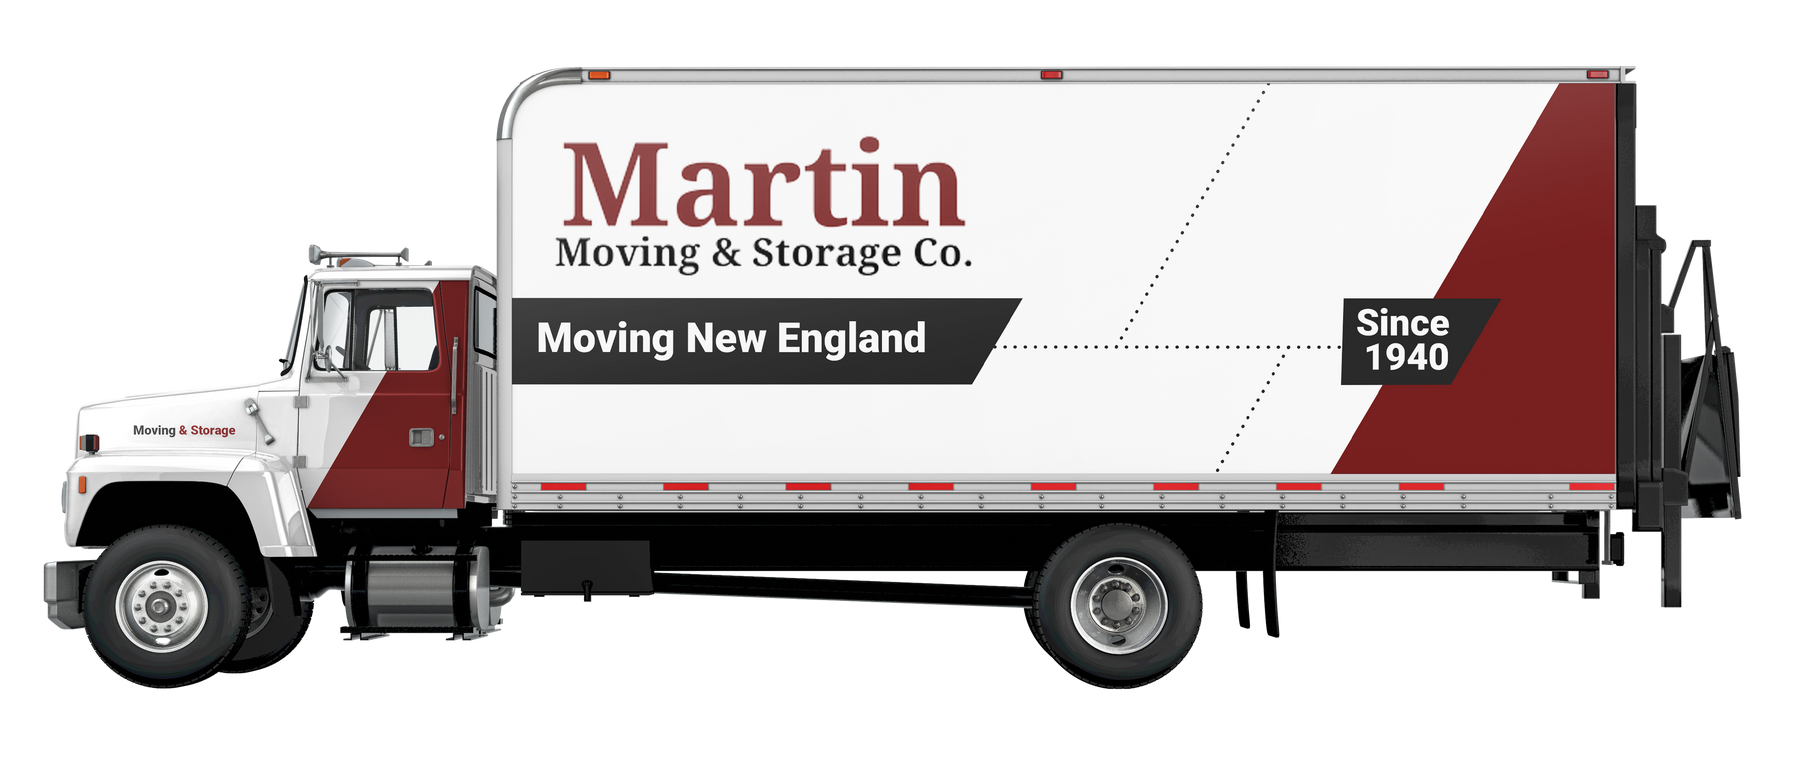 Martin Moving & Storage movers in Middletown, CT